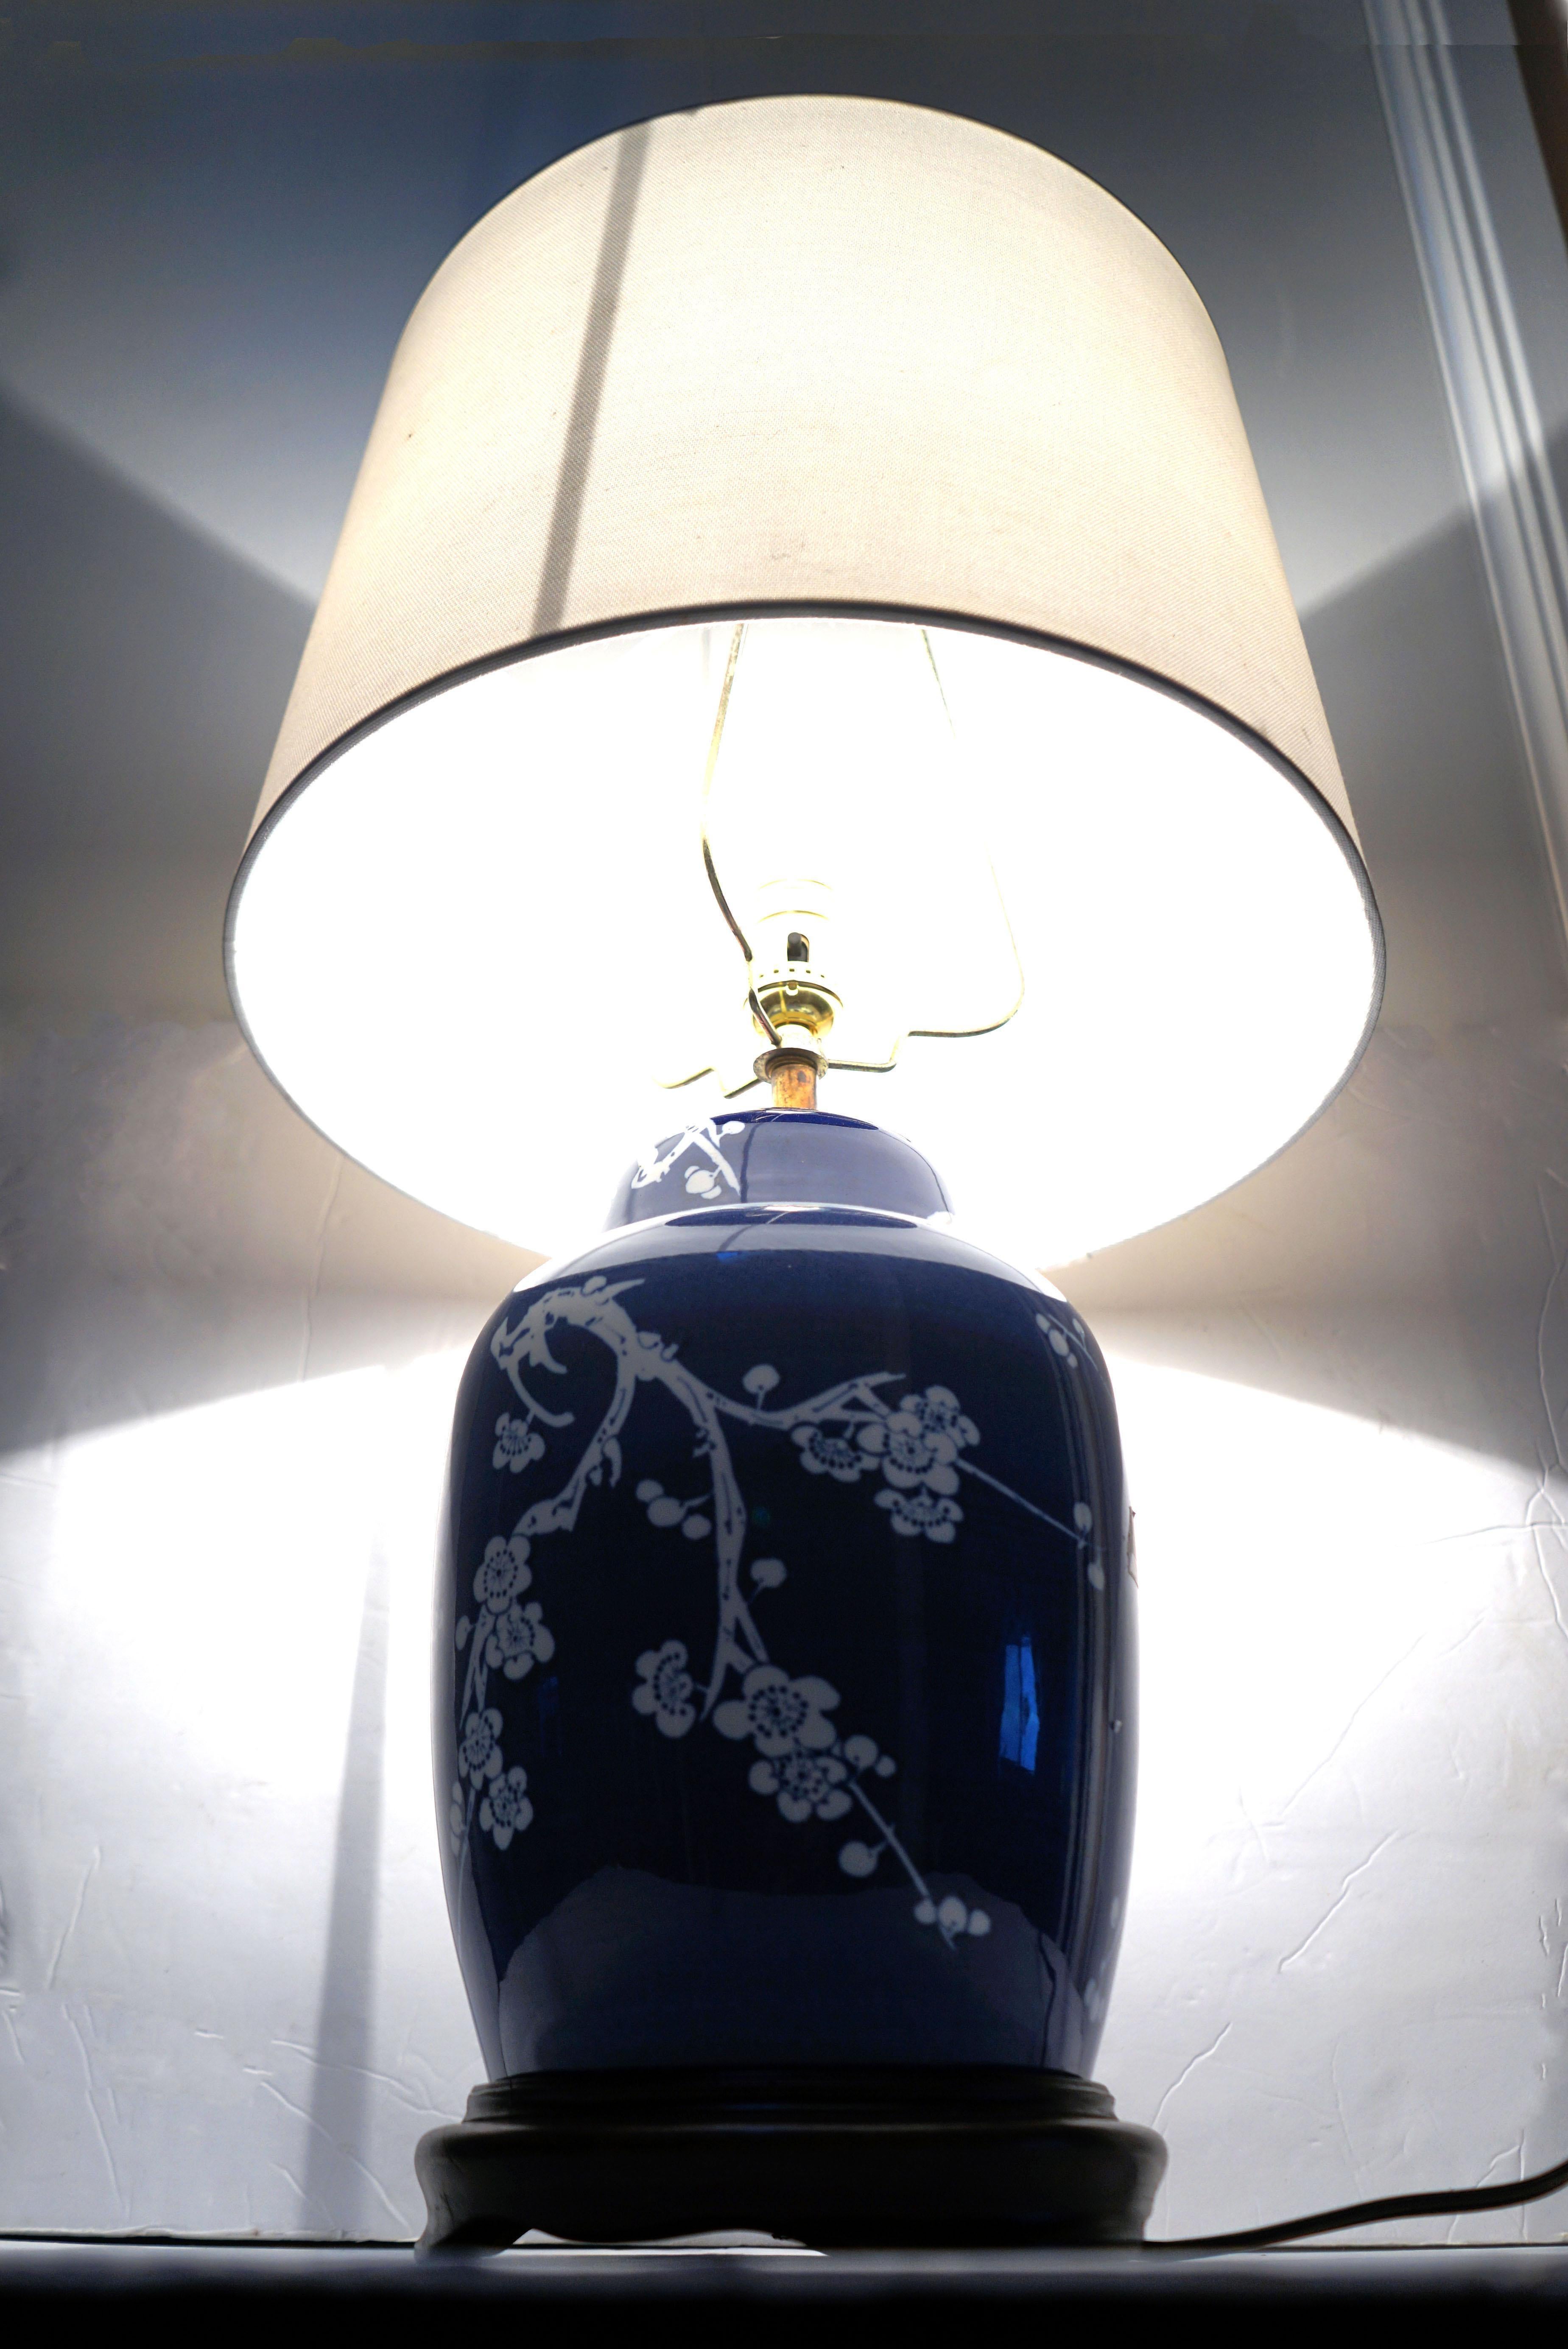 The blue cobalt and white contrasting prunus or cherry blossoms on a ginger jar lamp are exceptional. The blue and white Chinese ginger jar lamp is delightful. The contrast is sharp on a walnut base with a round shade that is original to the piece.